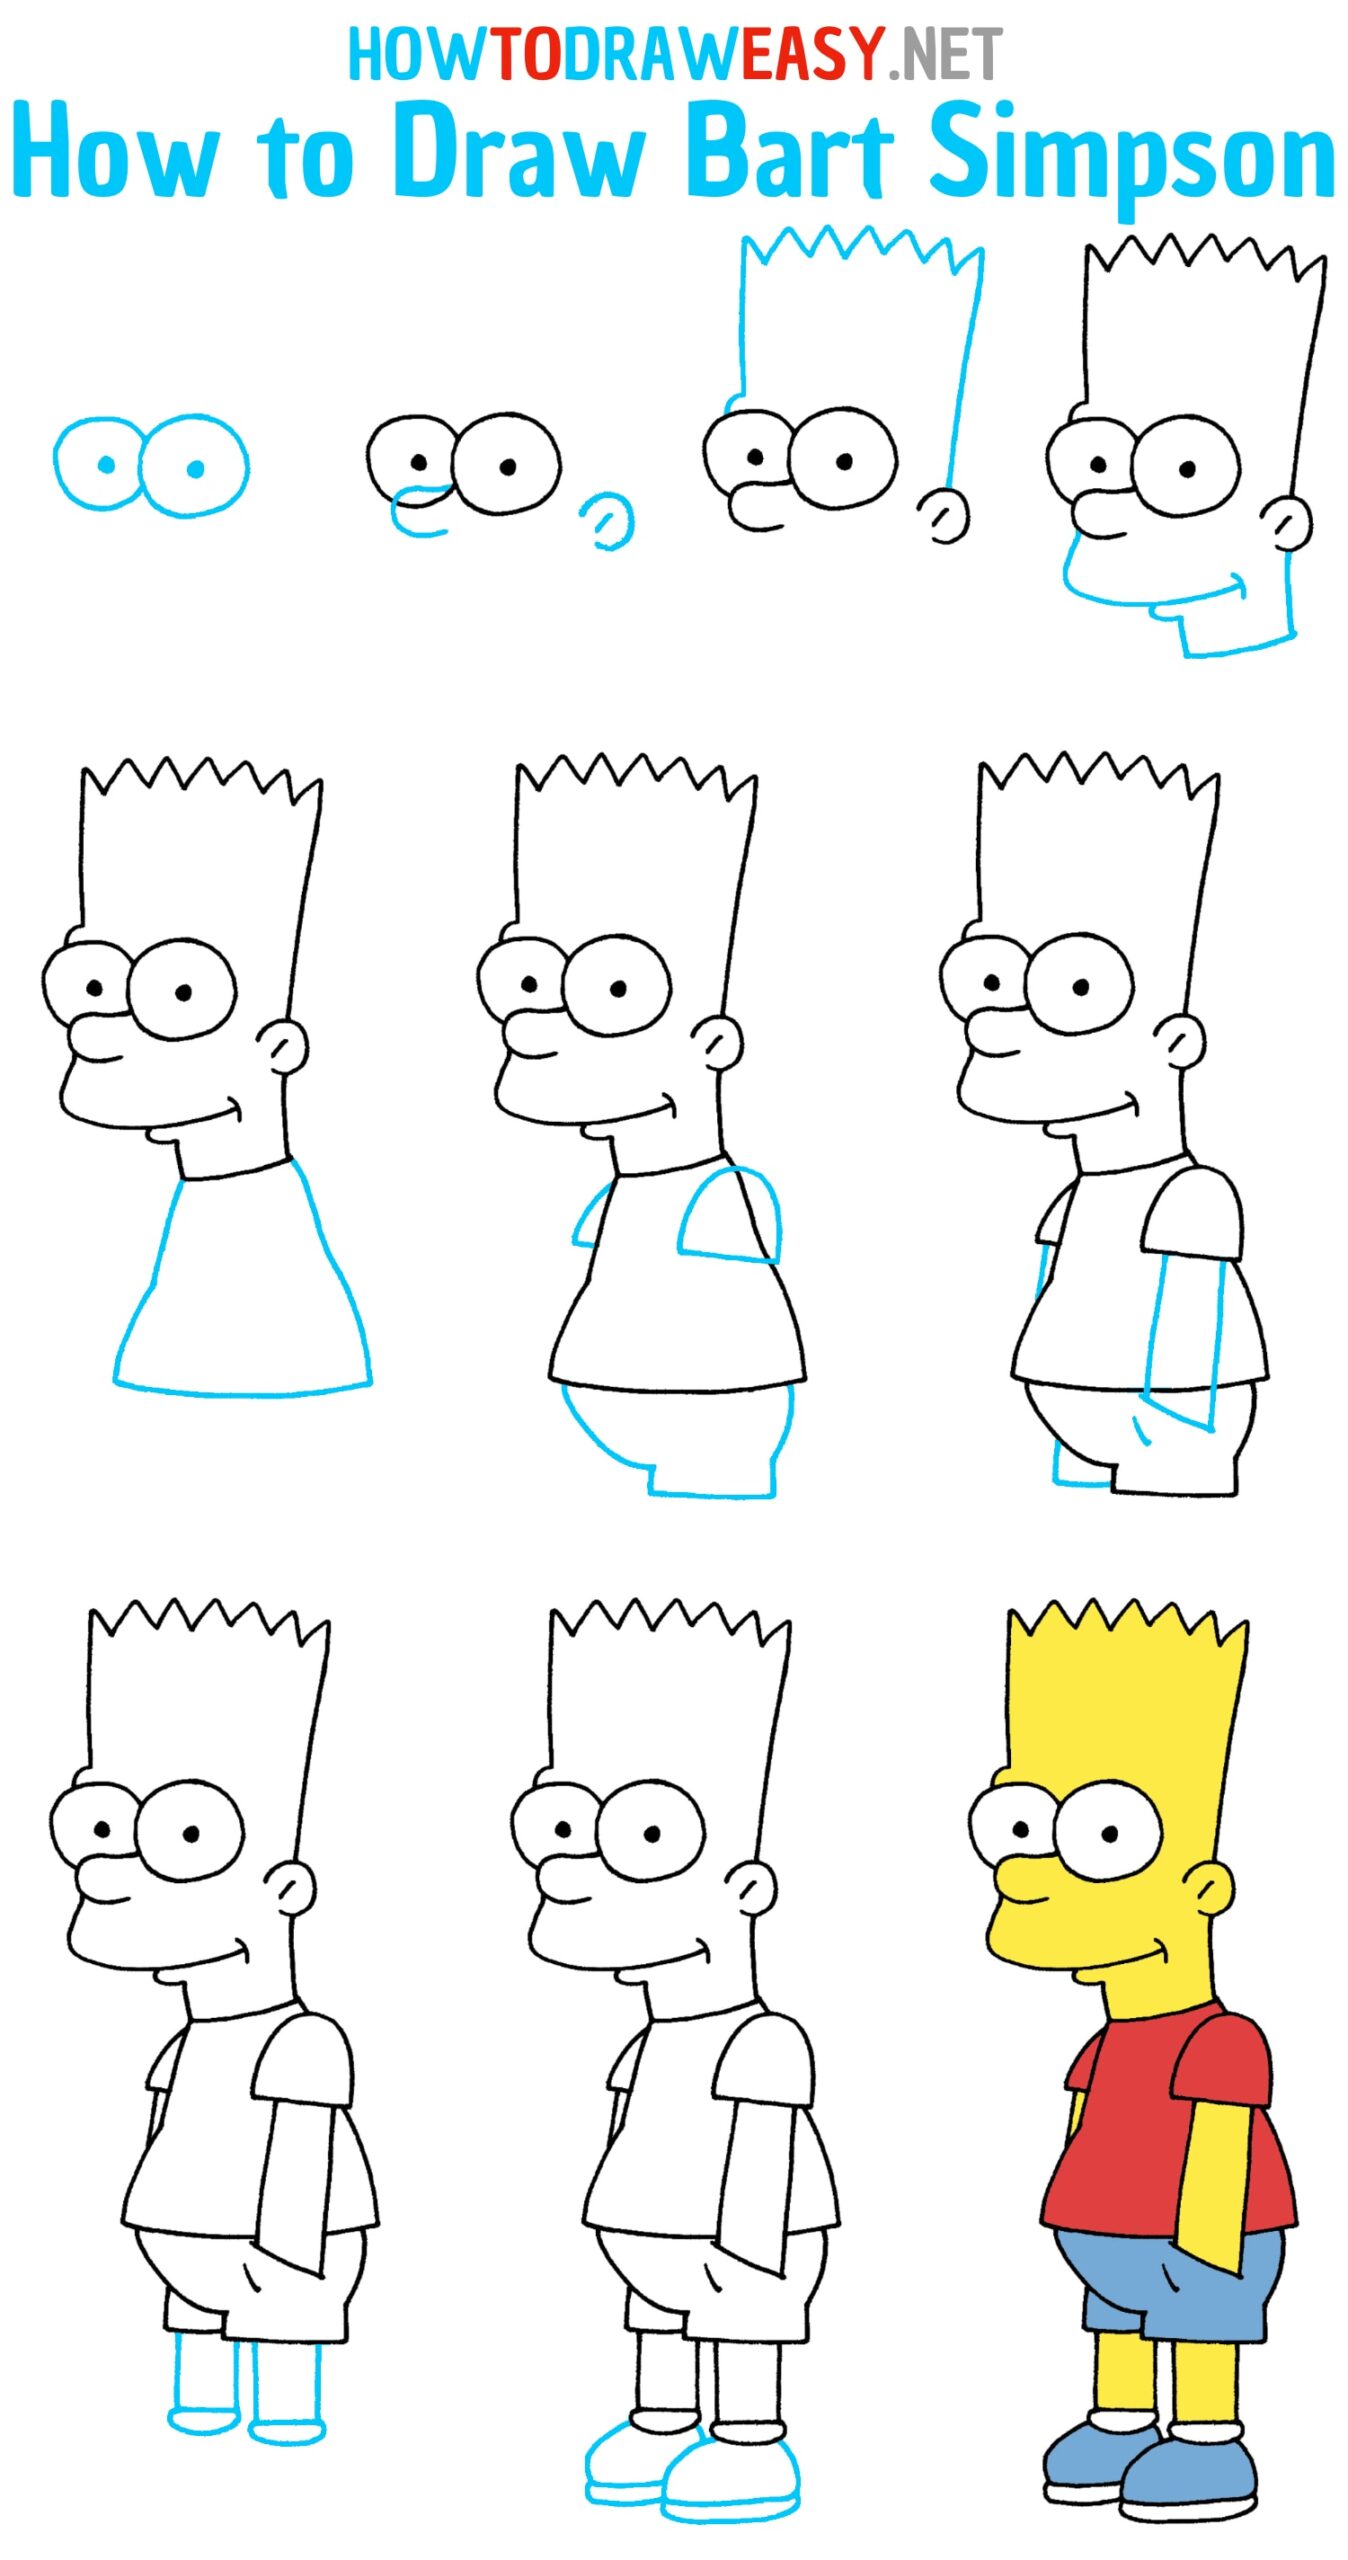 How to Draw Bart Simpson Step by Step